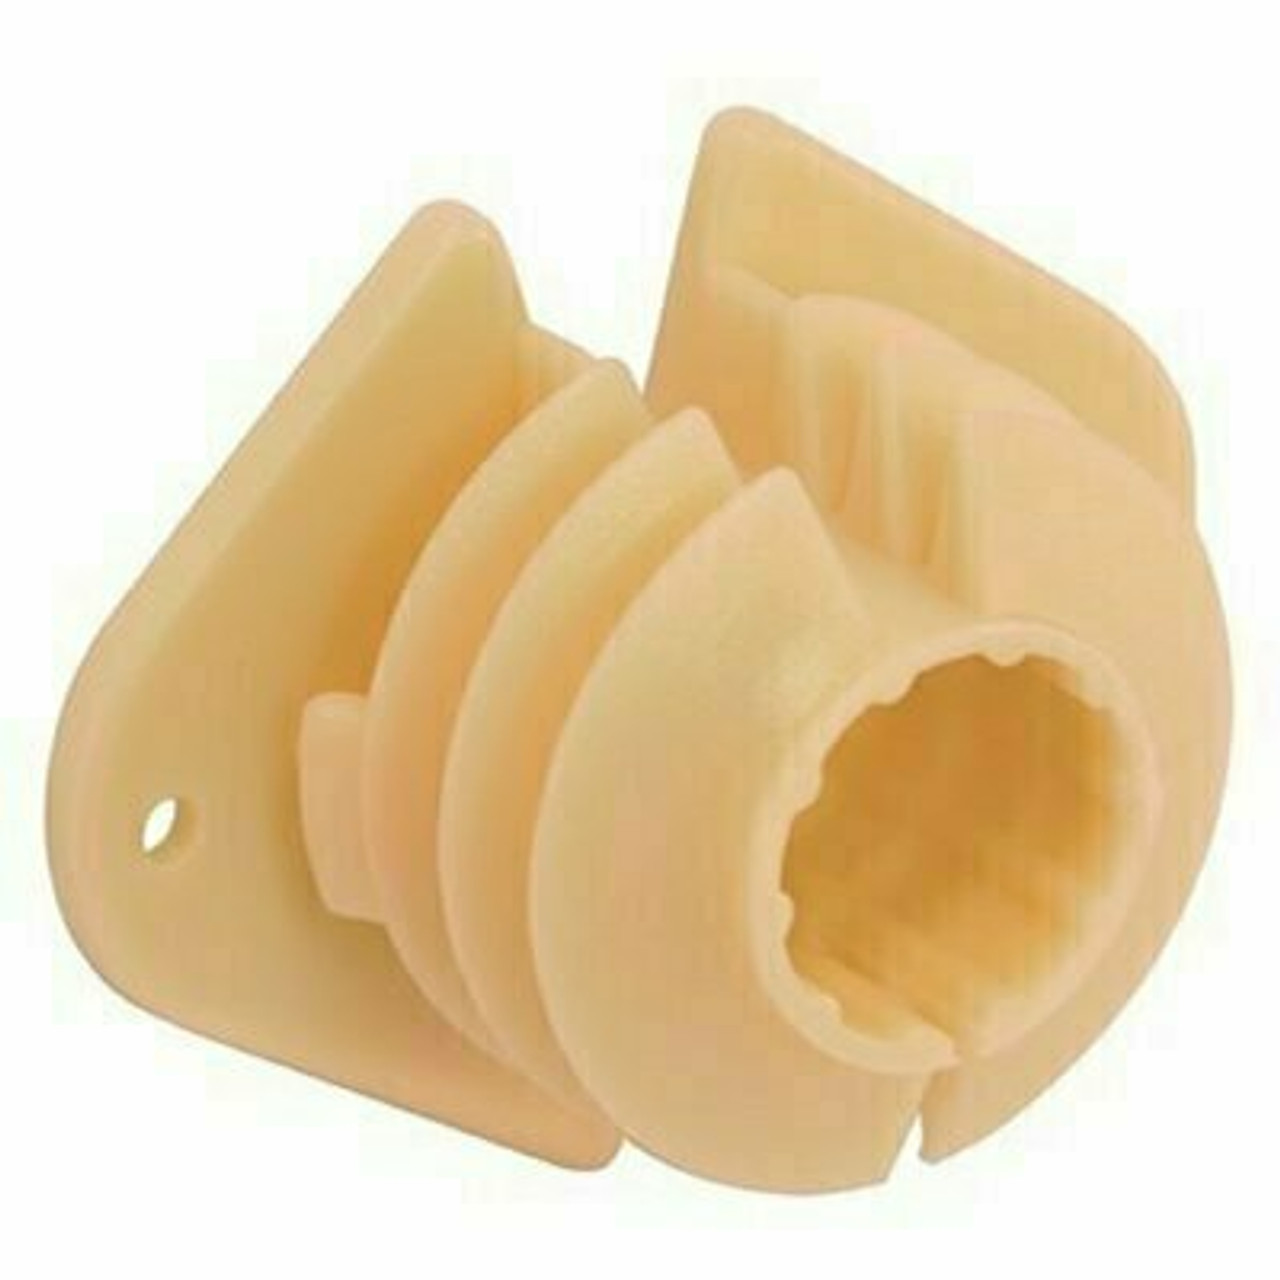 Ips Corporation Water-Tite 82975 Plastic Pipe Insulator, Supports 1-Inch Cts Pipe, 25 Pack - 2491263